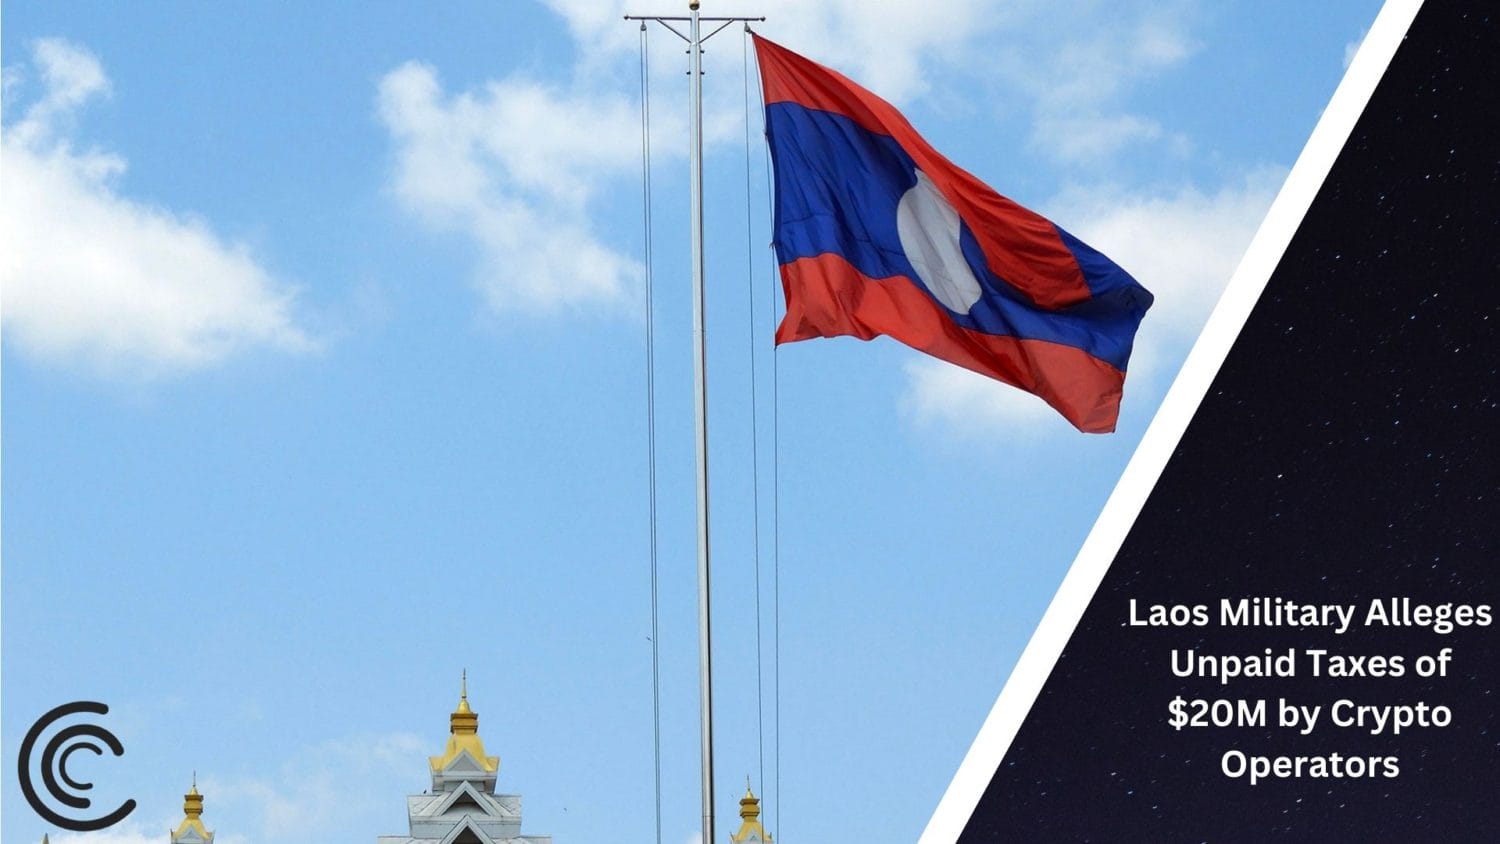 Laos Military Alleges Unpaid Taxes Of $20M By Crypto Operators